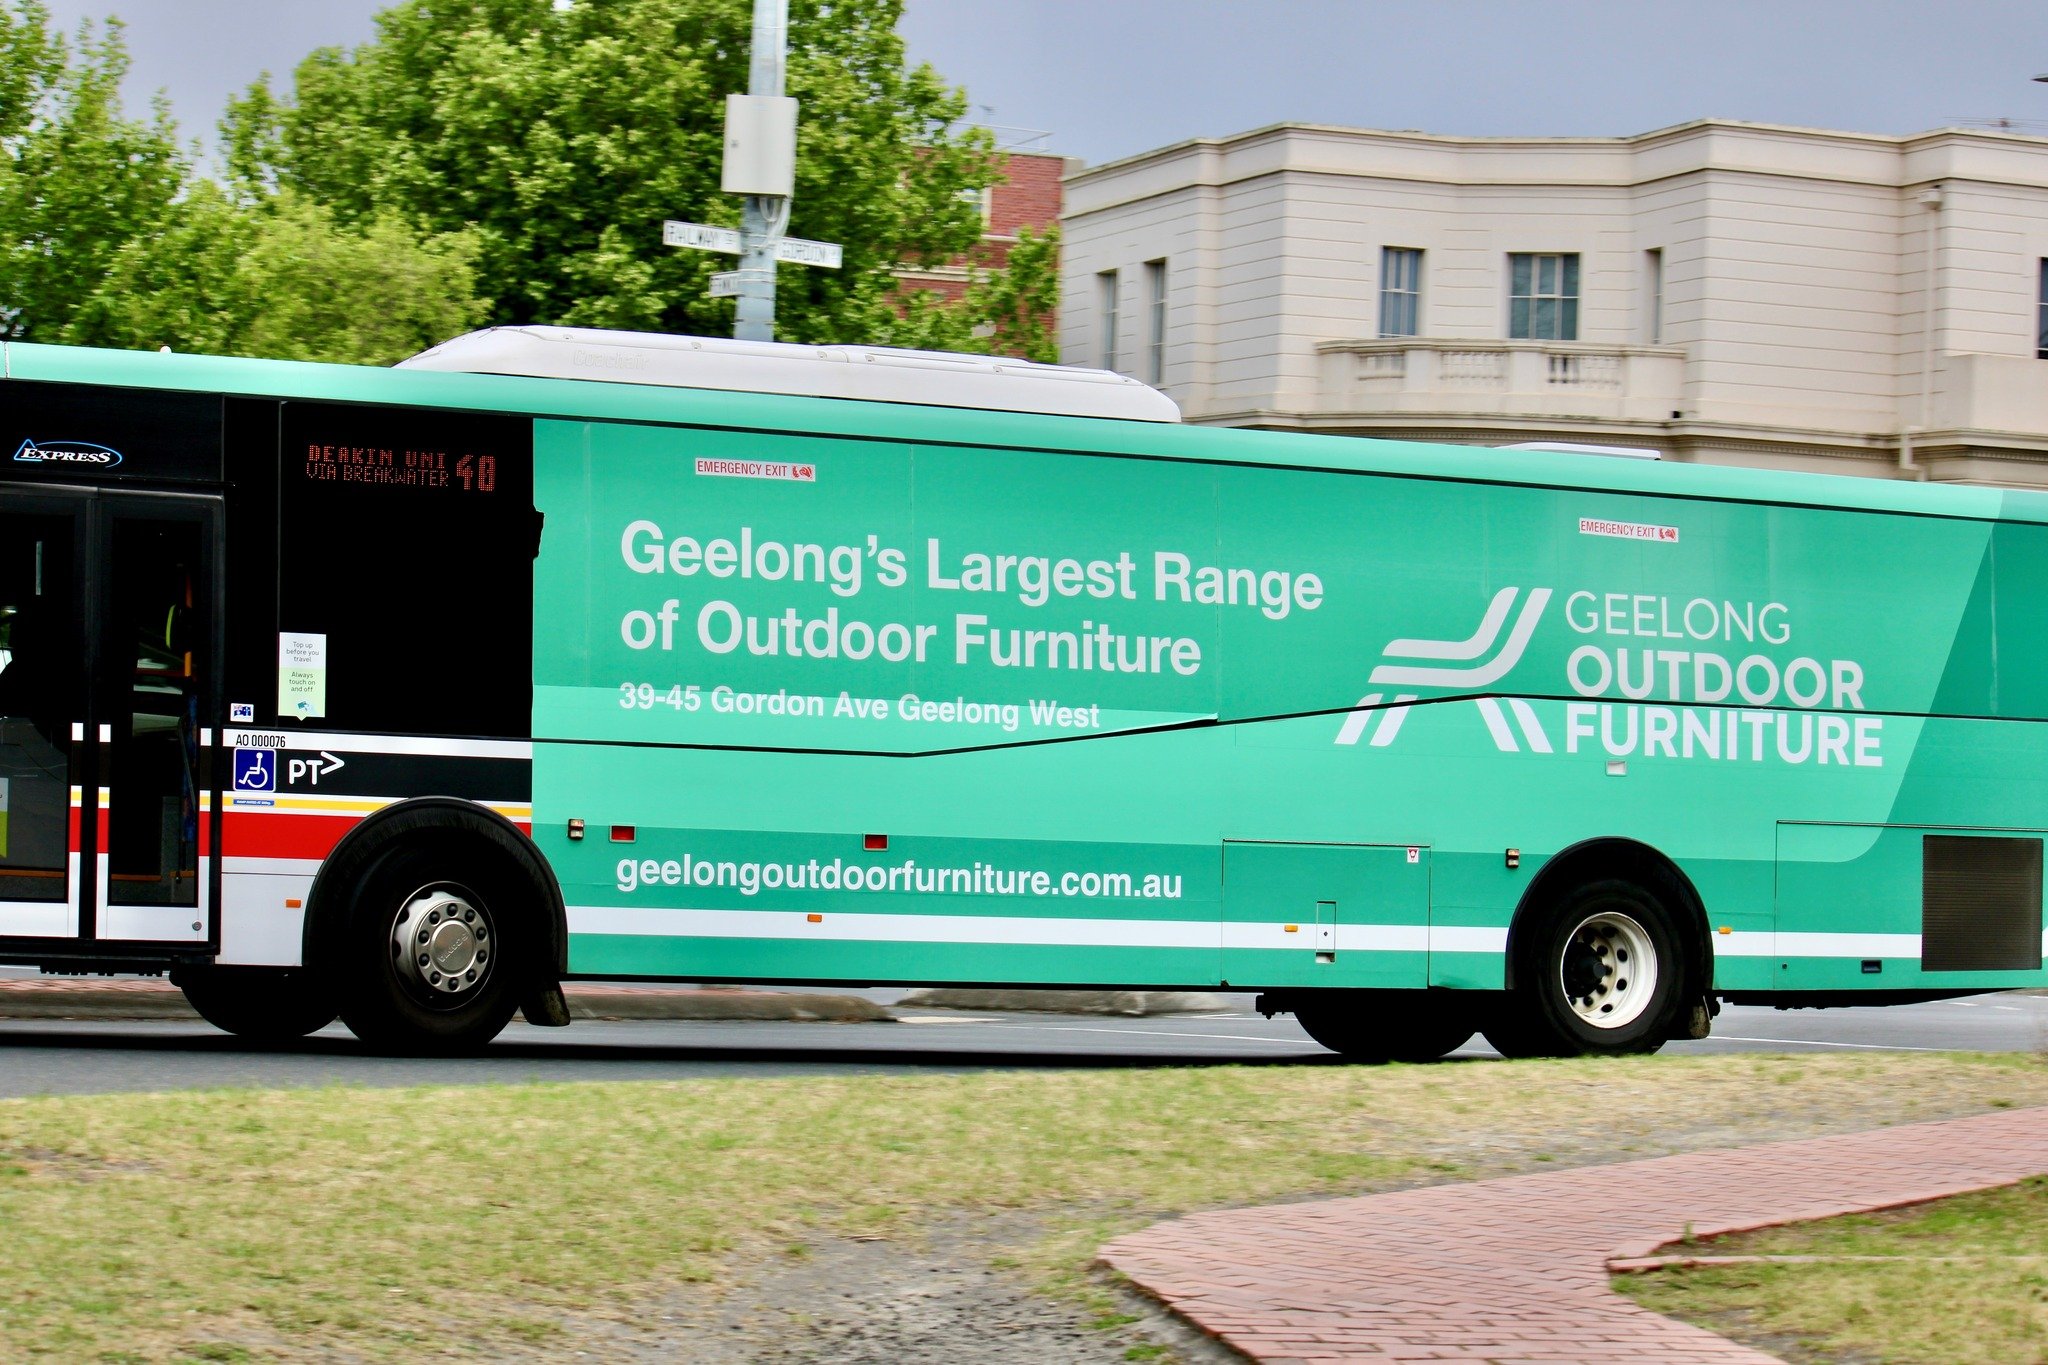 Have you seen the Geelong Outdoor Furniture bus wraps around Geelong, Bellarine and the Surf Coast? What a fantastic campaign to build brand awareness for their new Geelong business.
#geelong #busads #mobilebillboard #streetmarketing #transitadvertis